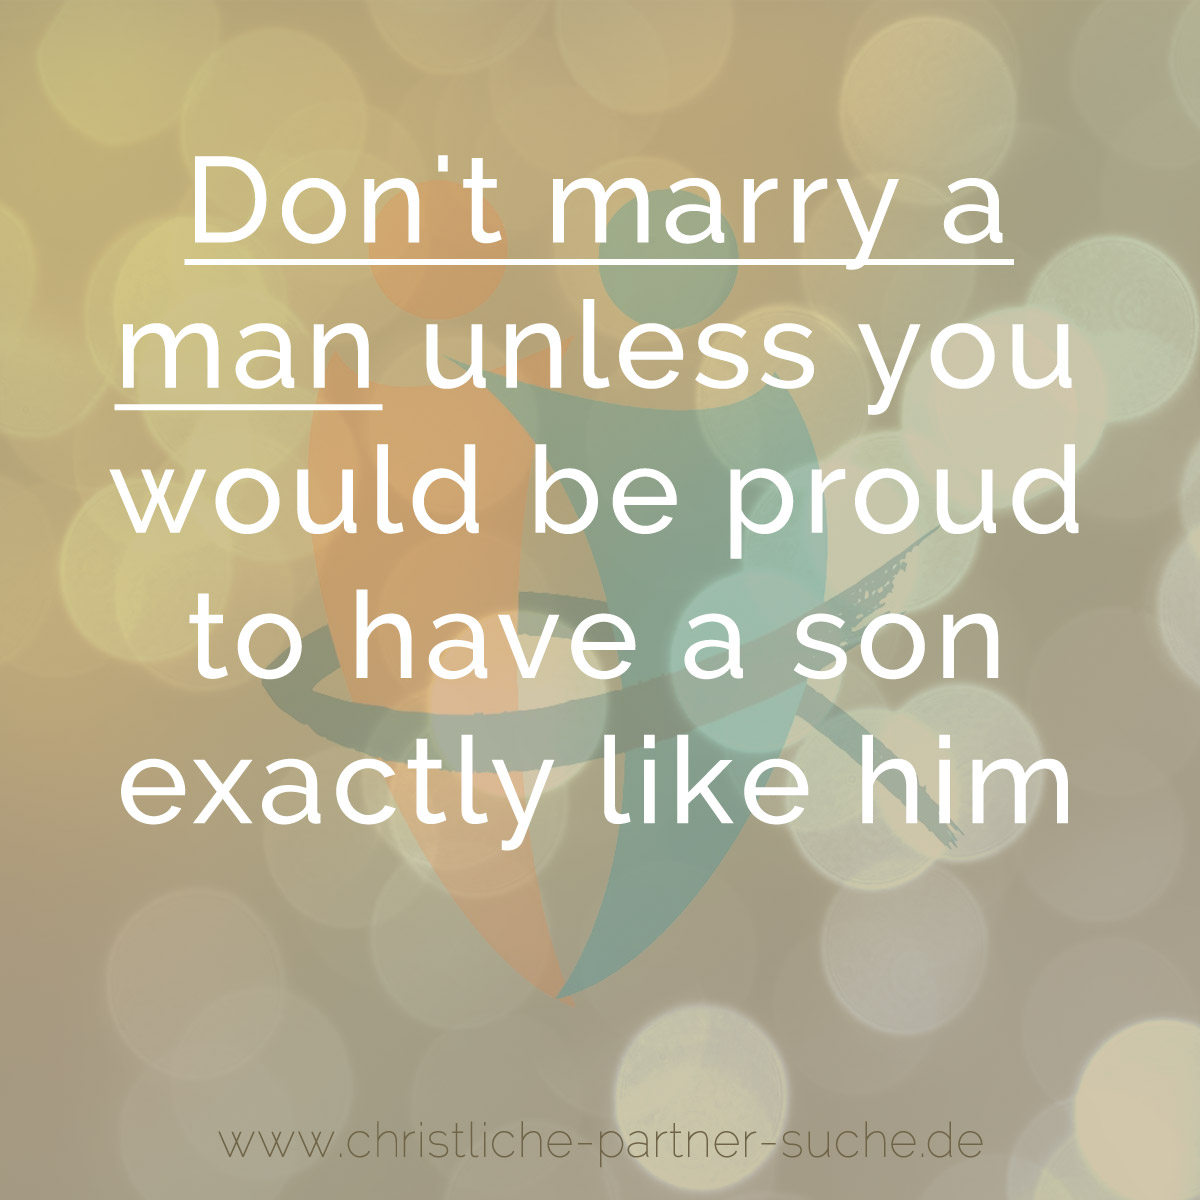 Don't marry a man